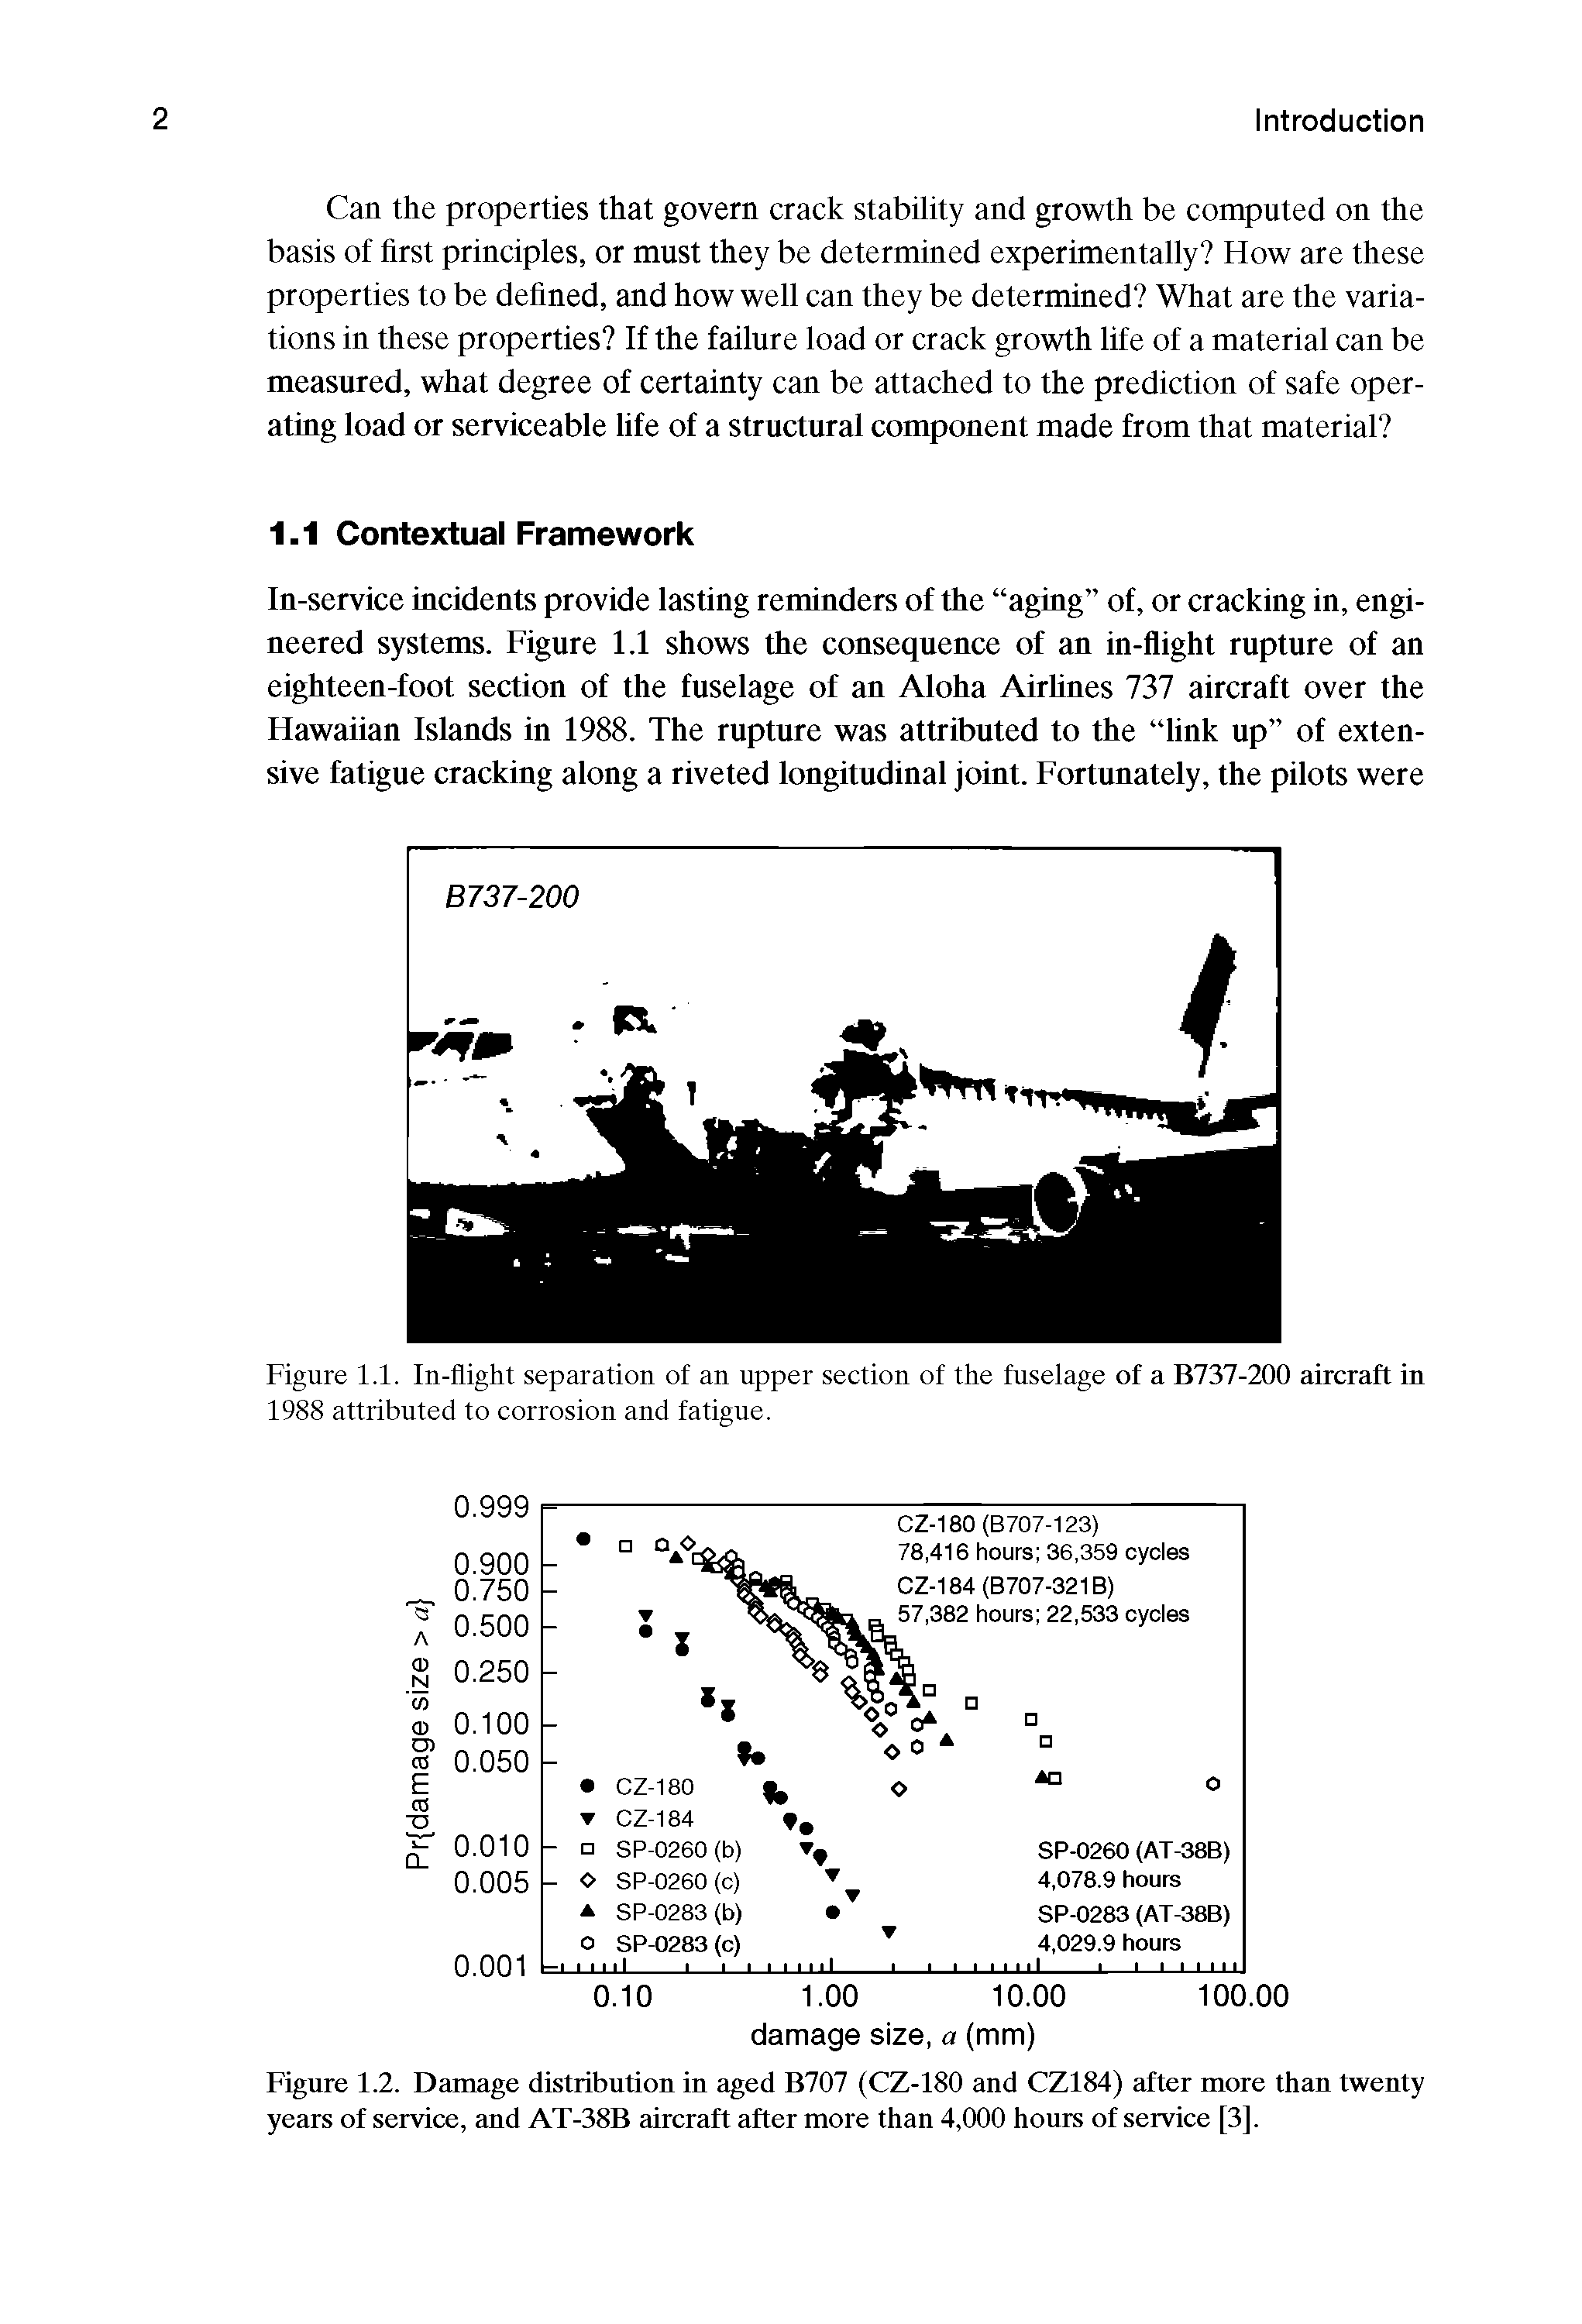 Figure 1.1. In-flight separation of an upper section of the fuselage of a B737-200 aircraft in 1988 attributed to corrosion and fatigue.